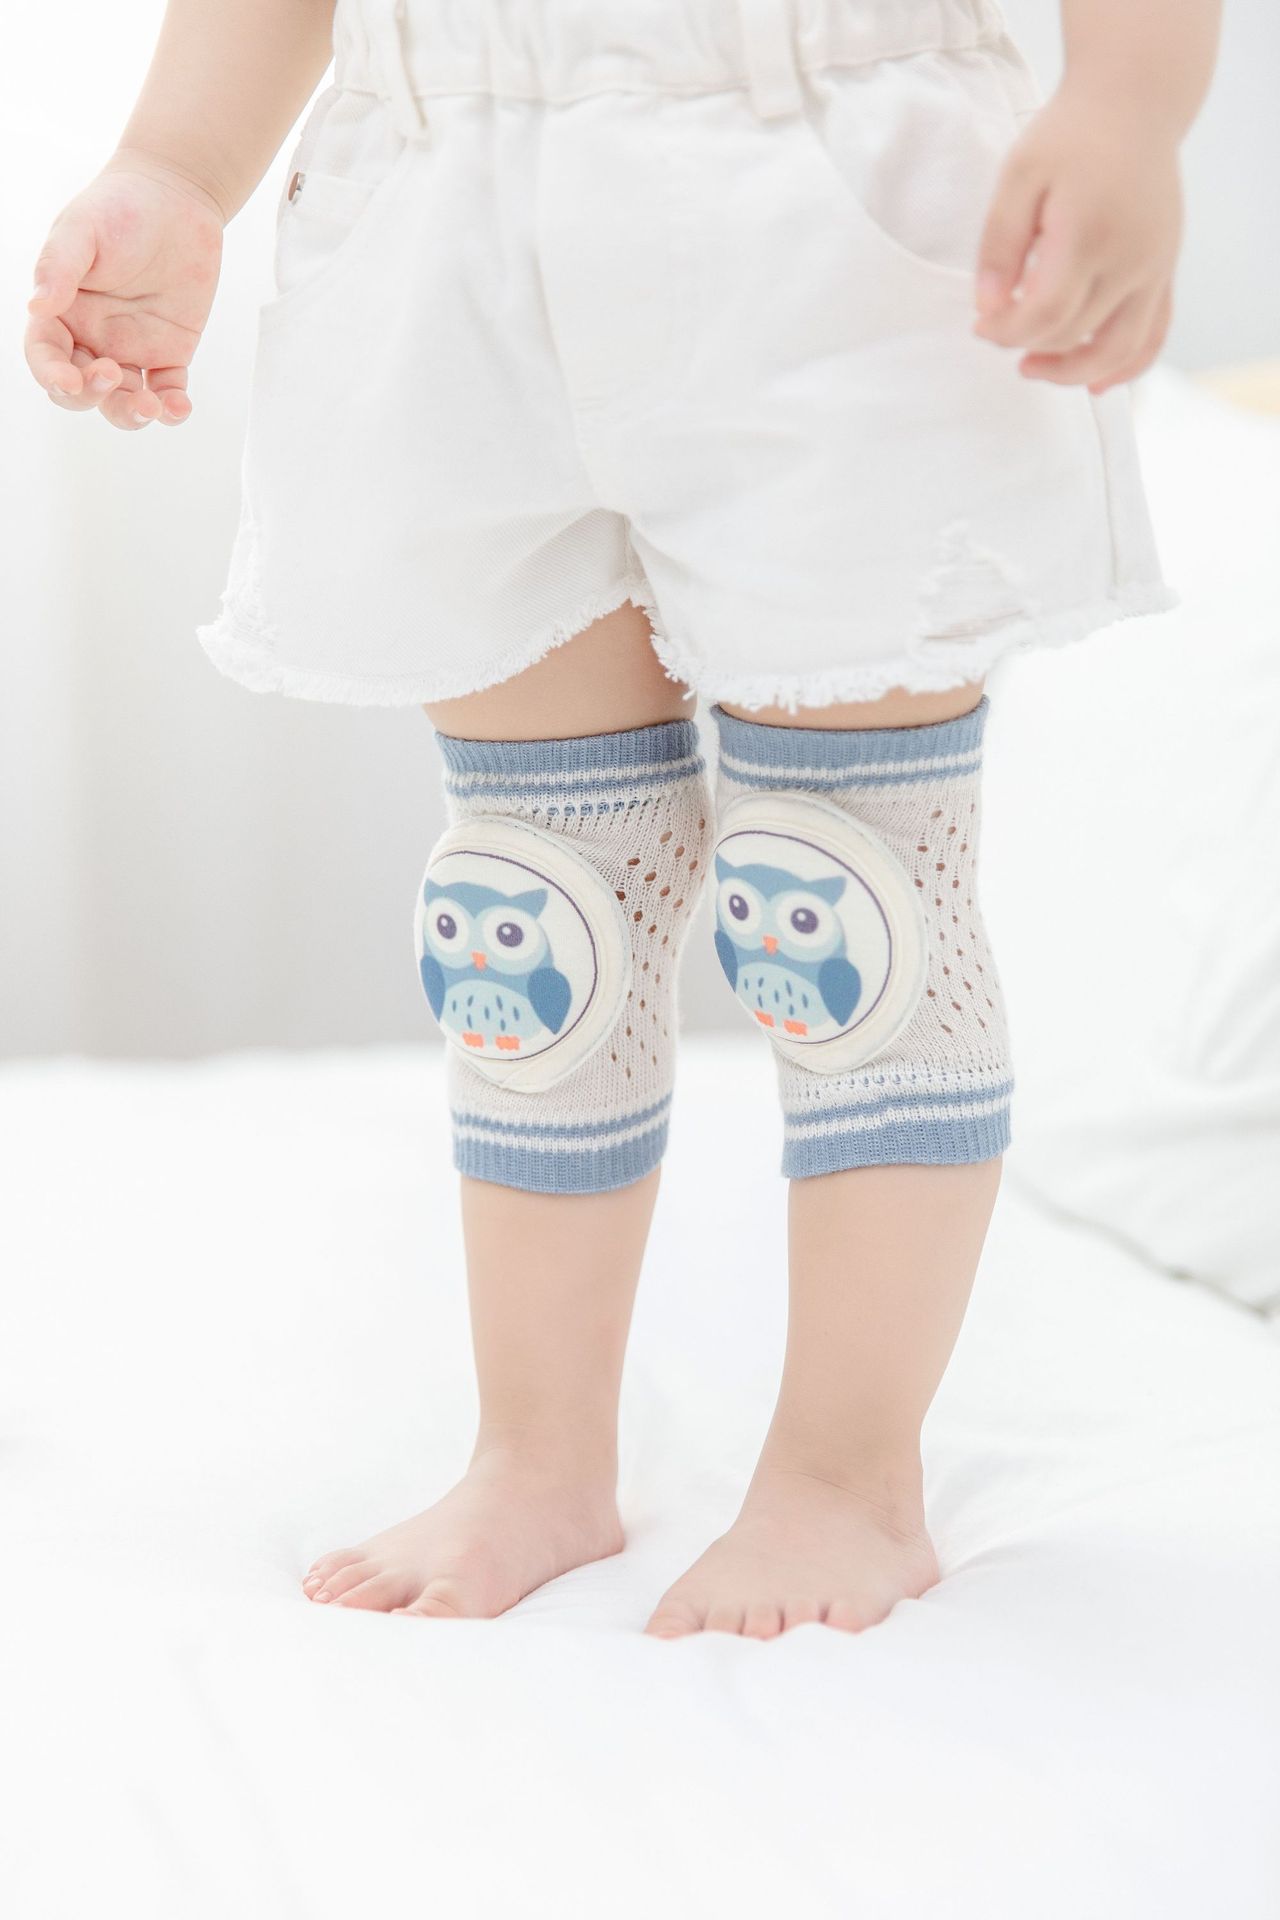 Baby Crawling Knee Pads: Protect Your Baby's Knees - Baby Sunflower